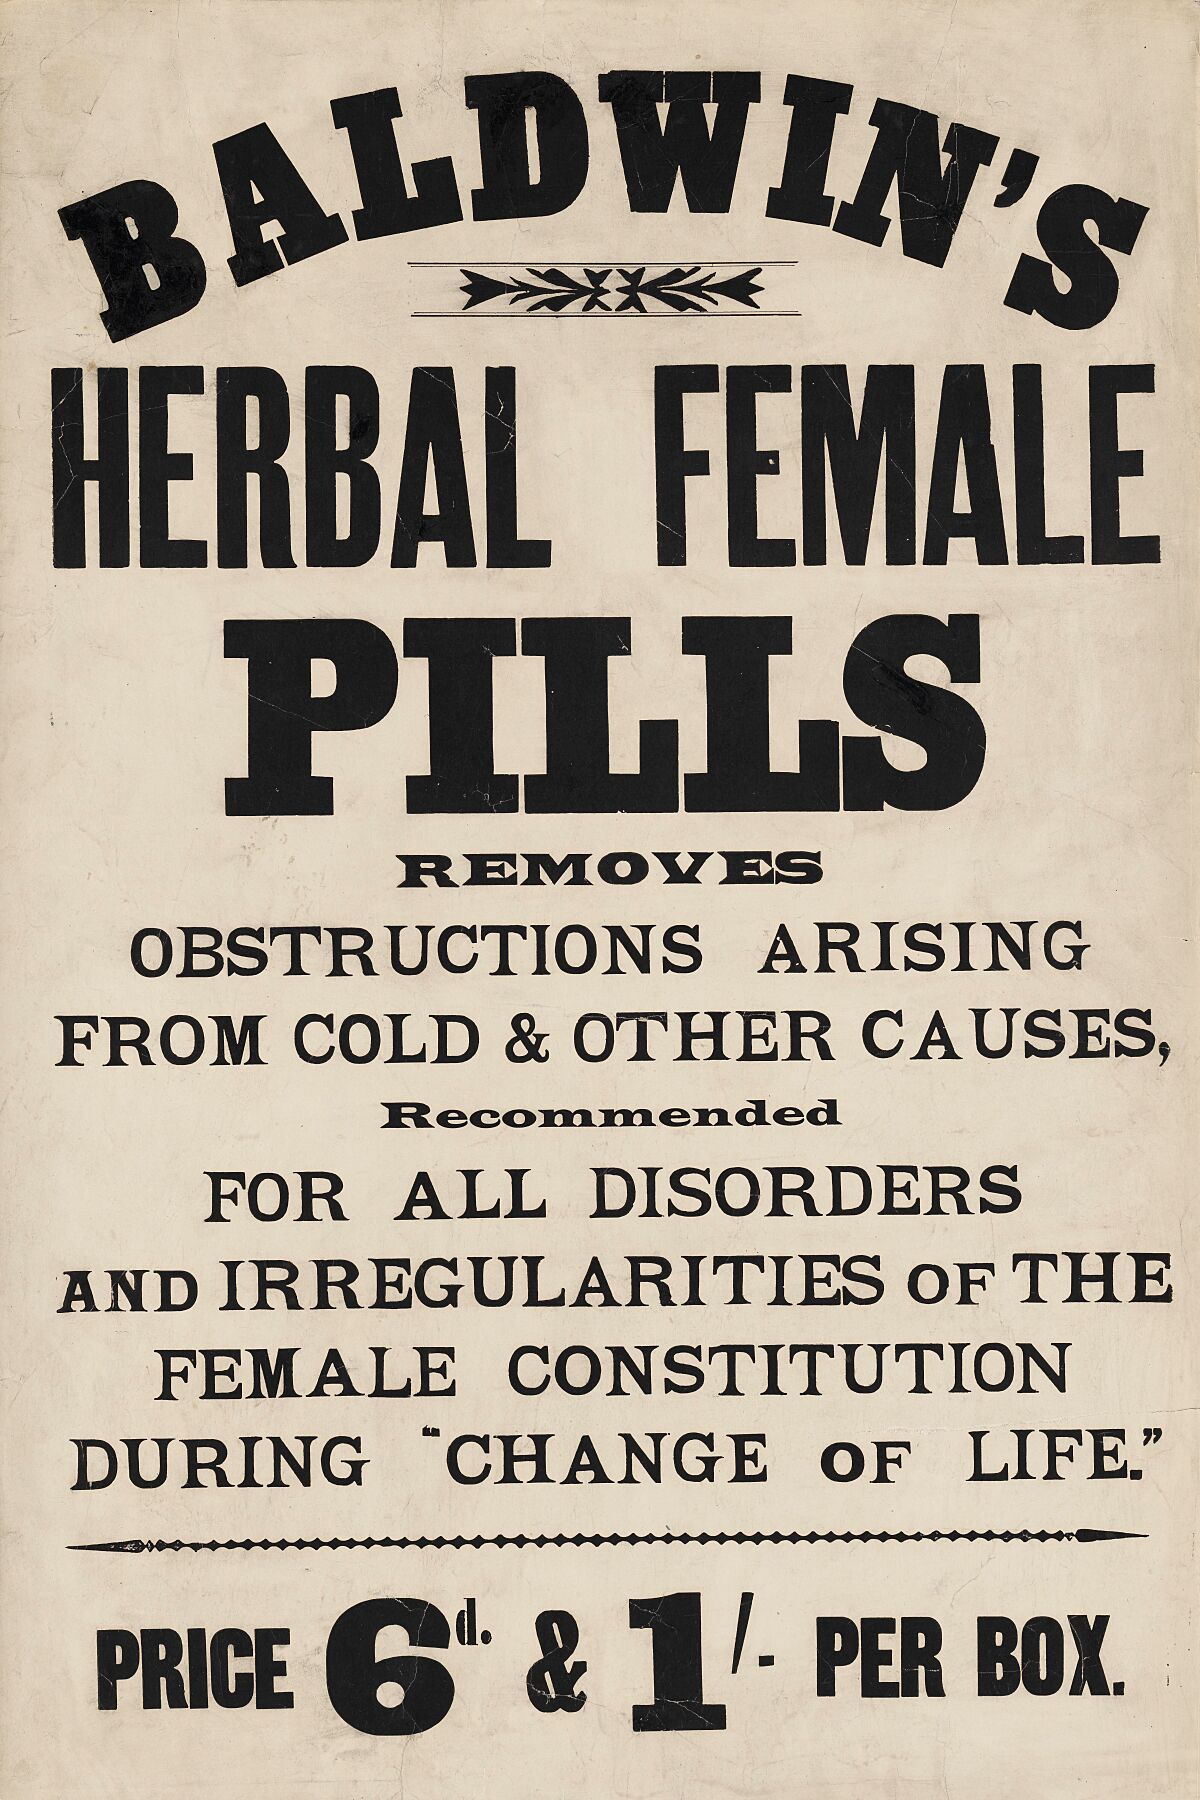 Baldwin's Herbal Female Pills - removes obstructions arising from cold and other causes, recommended for all disorders and irregularities of the female constitution during 'change of life'.  c.1900 Wellcome Collection